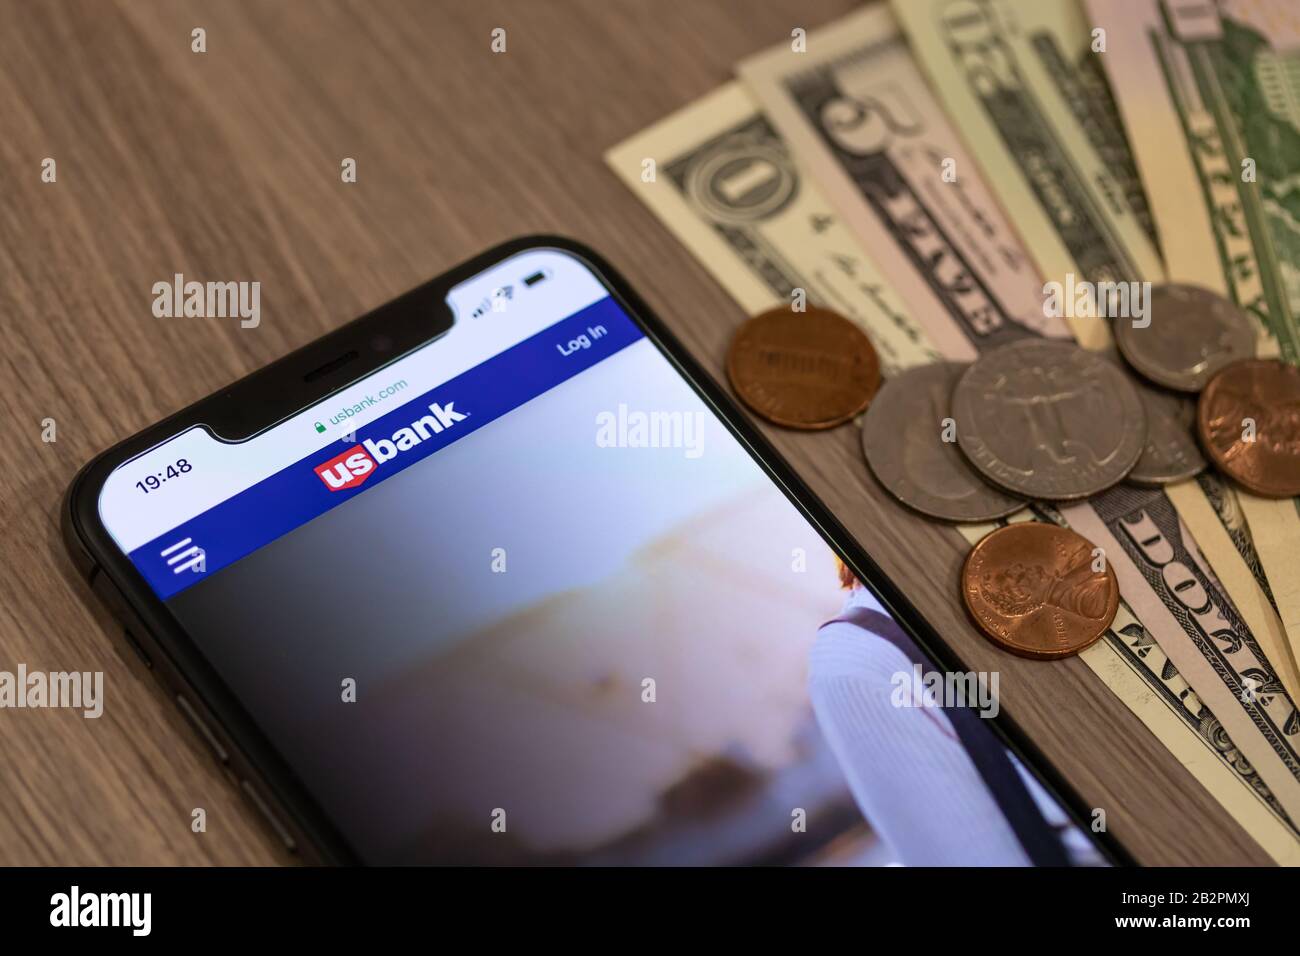 U.S. Bank logo atop of their website on a smartphone beside a pile of American cash and change on a desk. Stock Photo